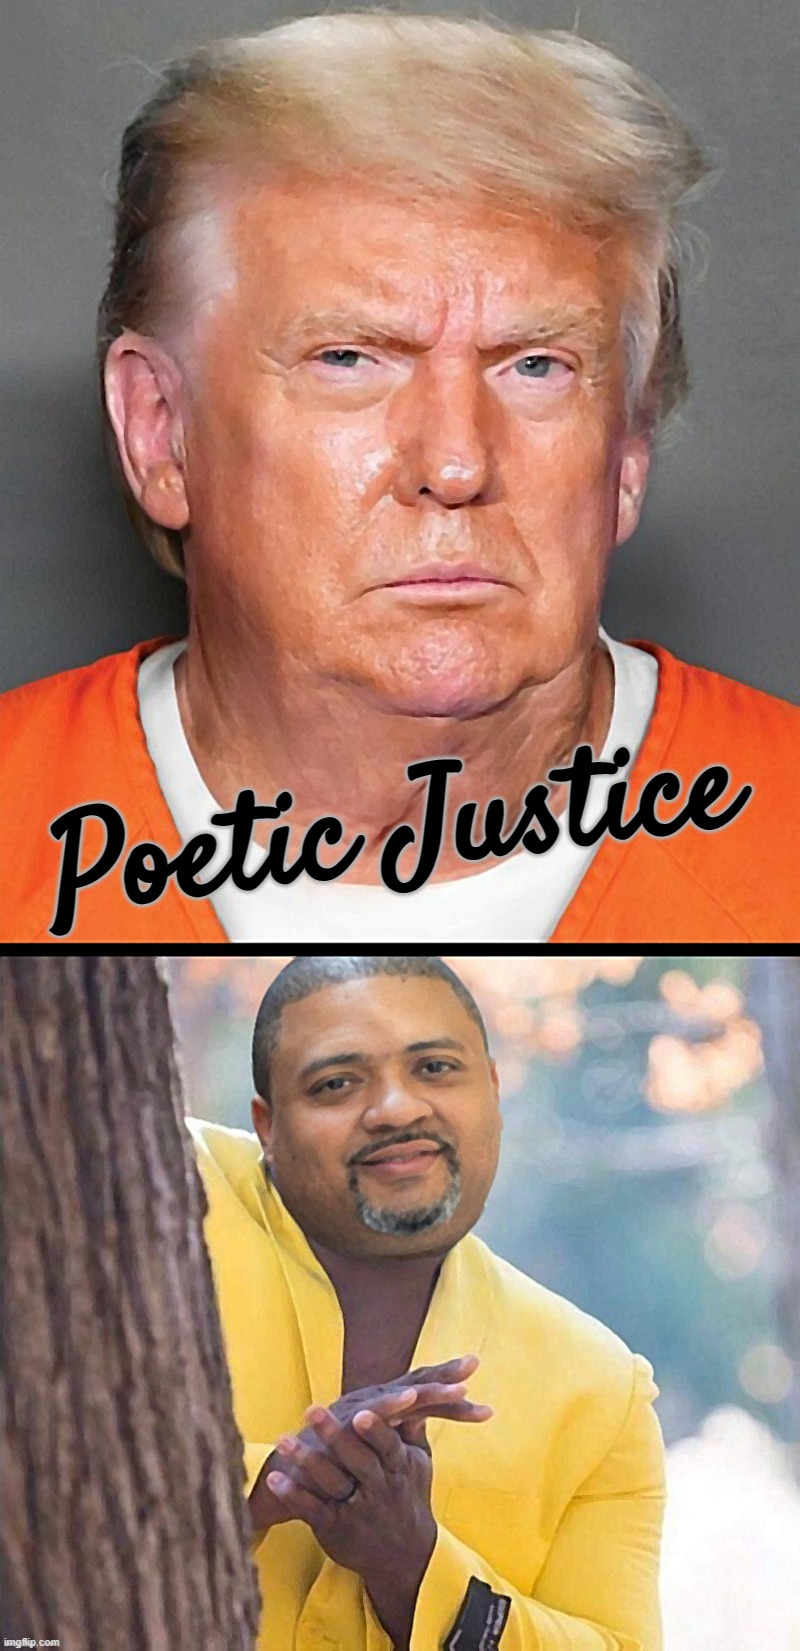 Poetic Justice...! | Poetic Justice | image tagged in trump,mugshot,thank you,alvin,bragging,lock him up | made w/ Imgflip meme maker